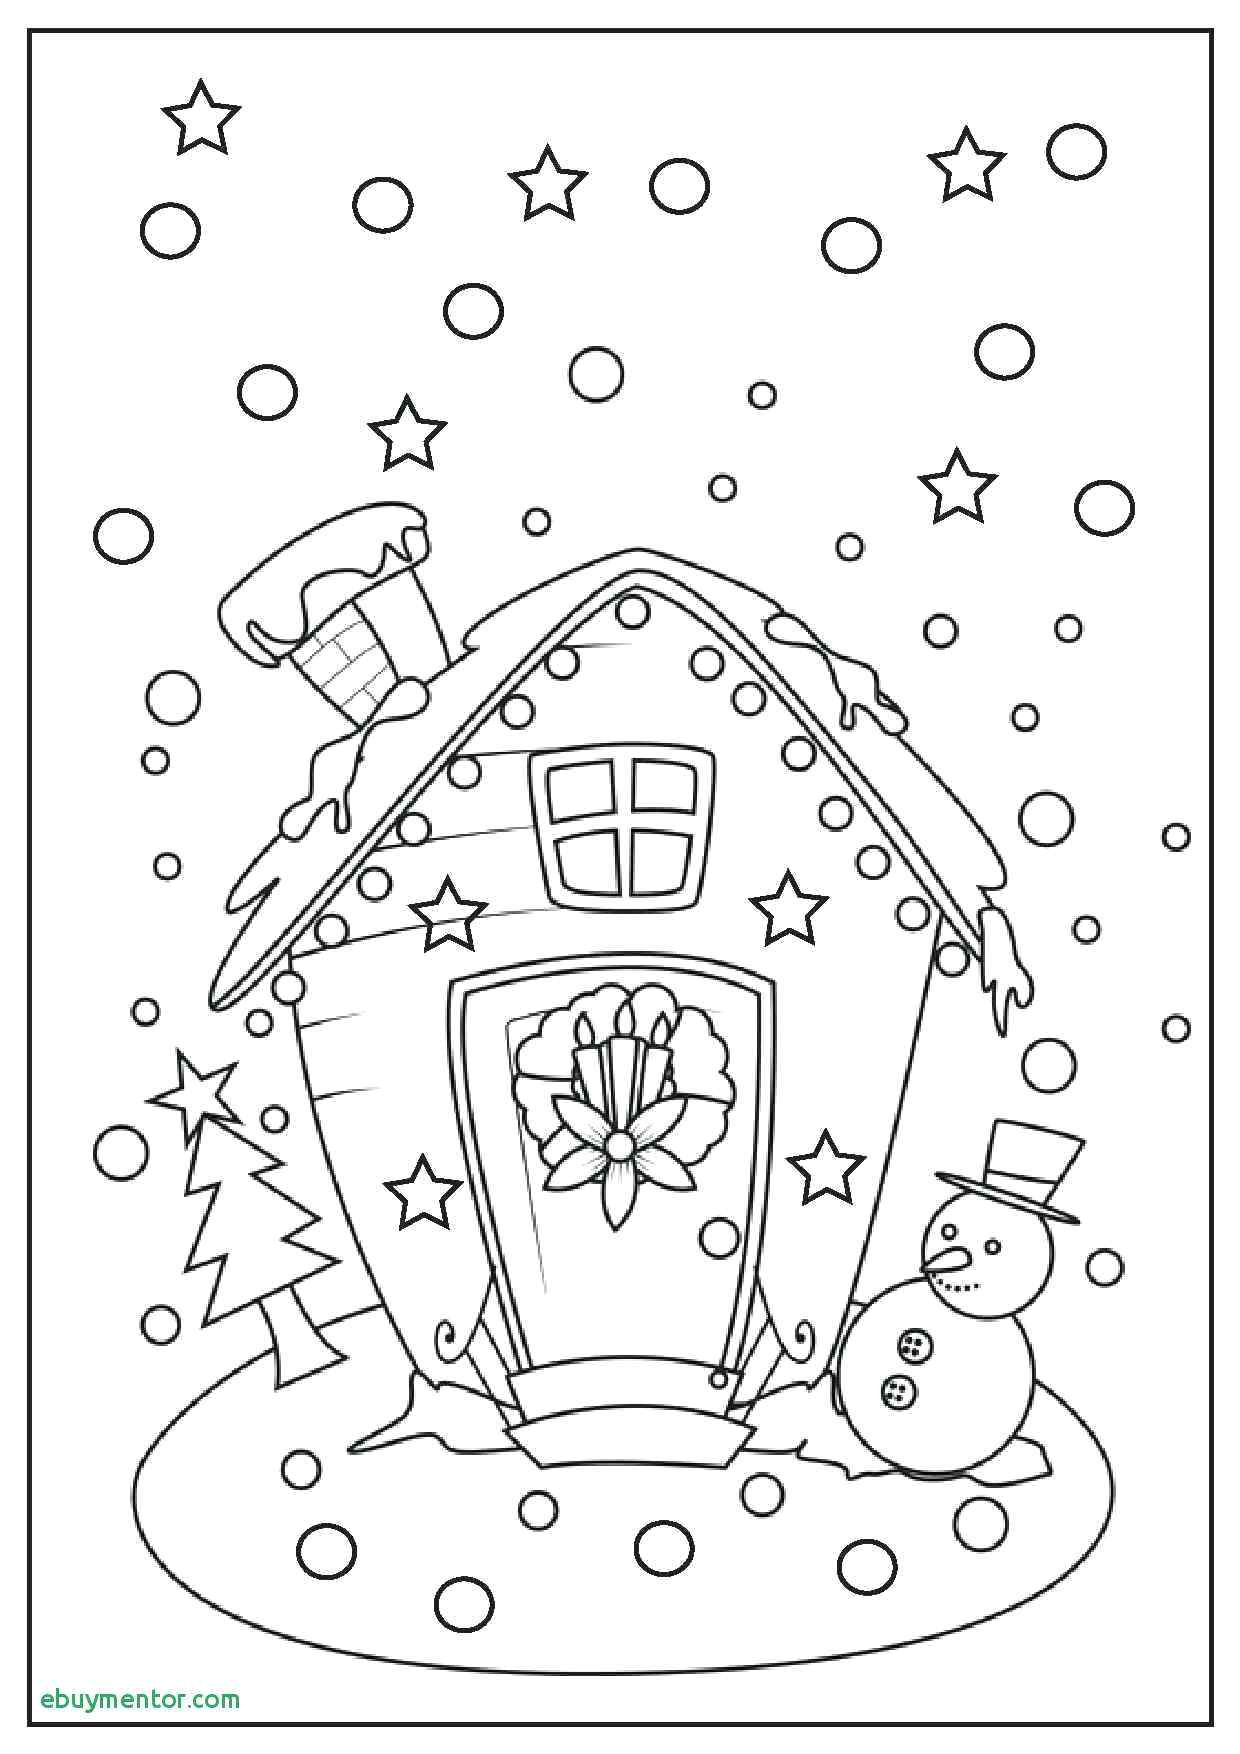 Drawing Christmas Things Christmas Decorations for Kids to Color Luxury Cool Coloring Page